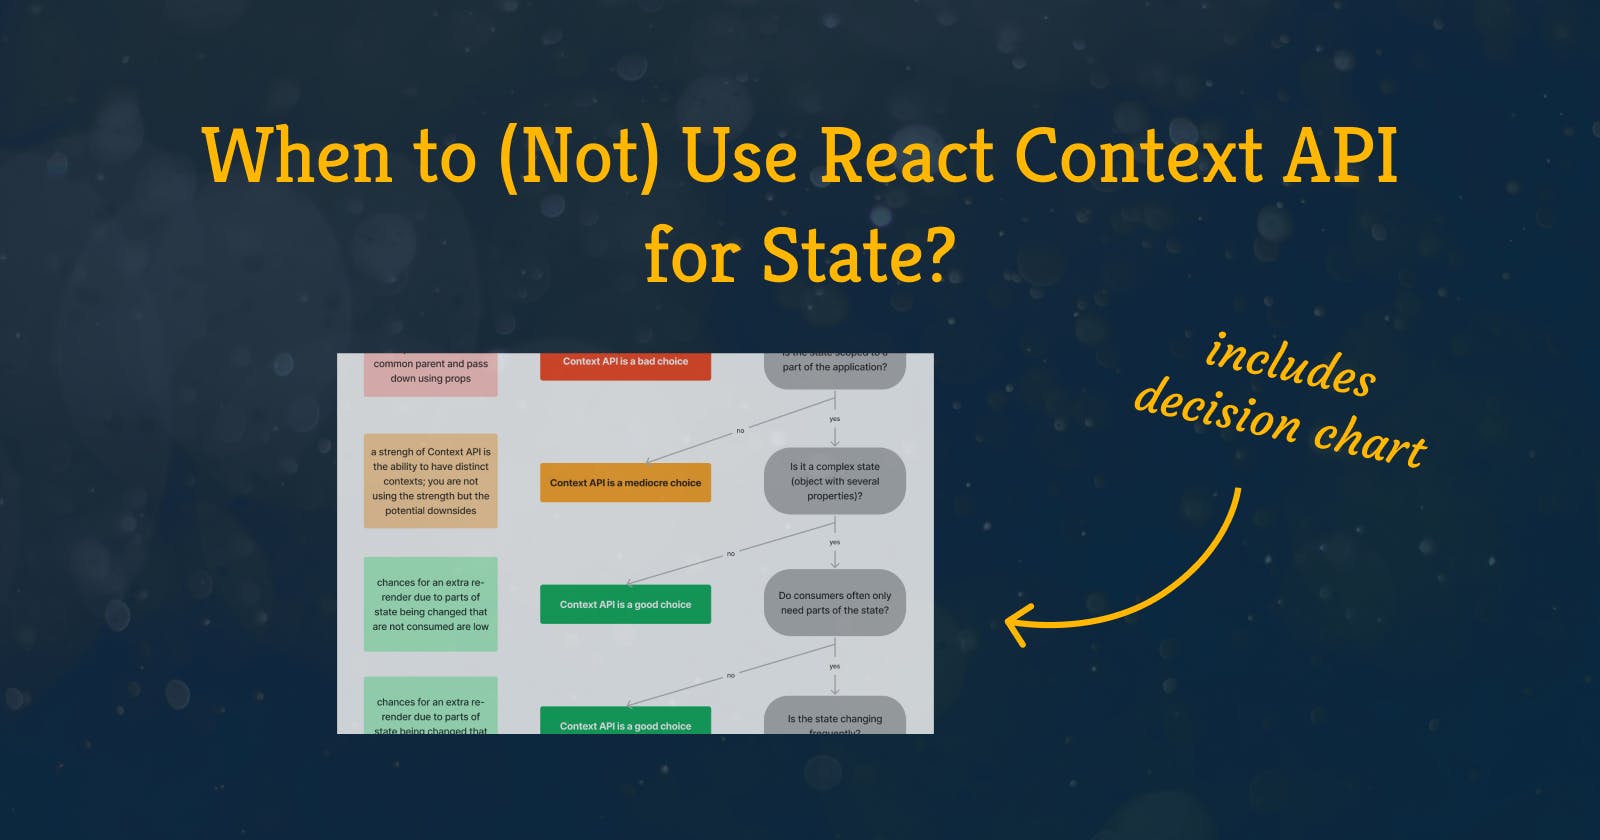 When to (Not) Use React Context API for State?